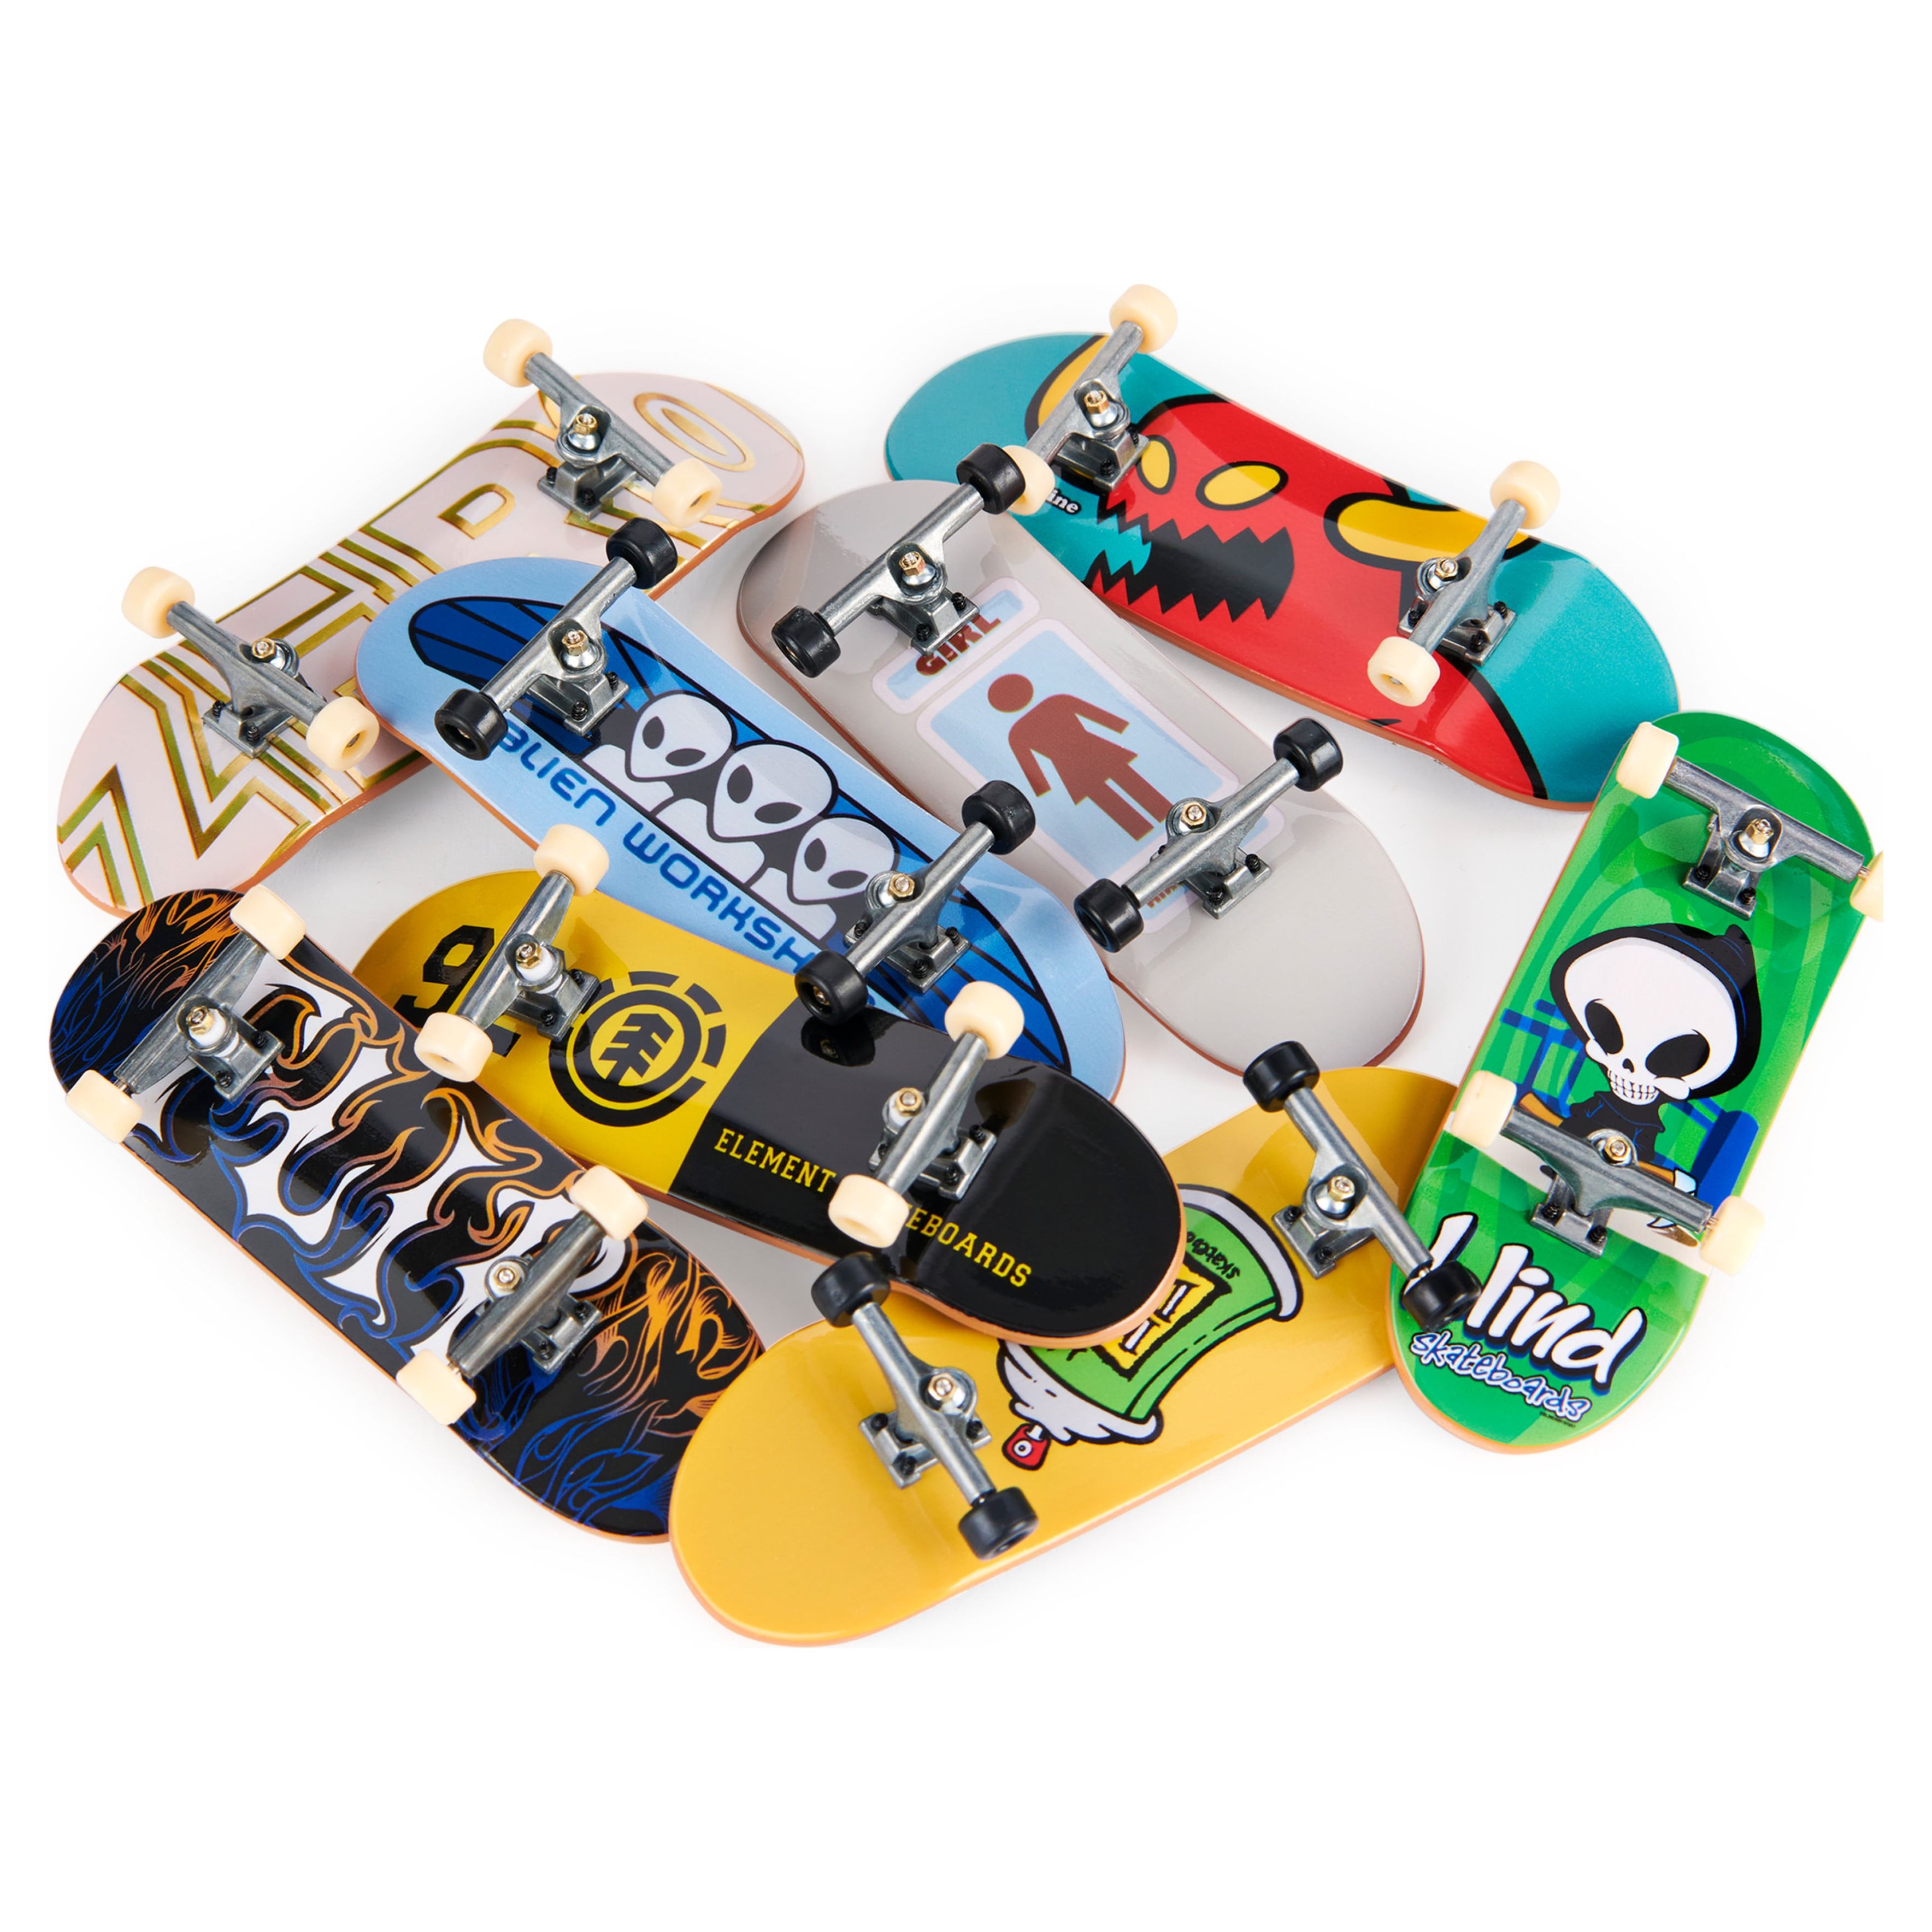 Tech Deck, 96mm Throwback Series Finger Skateboard (Styles May Vary) - image 5 of 7